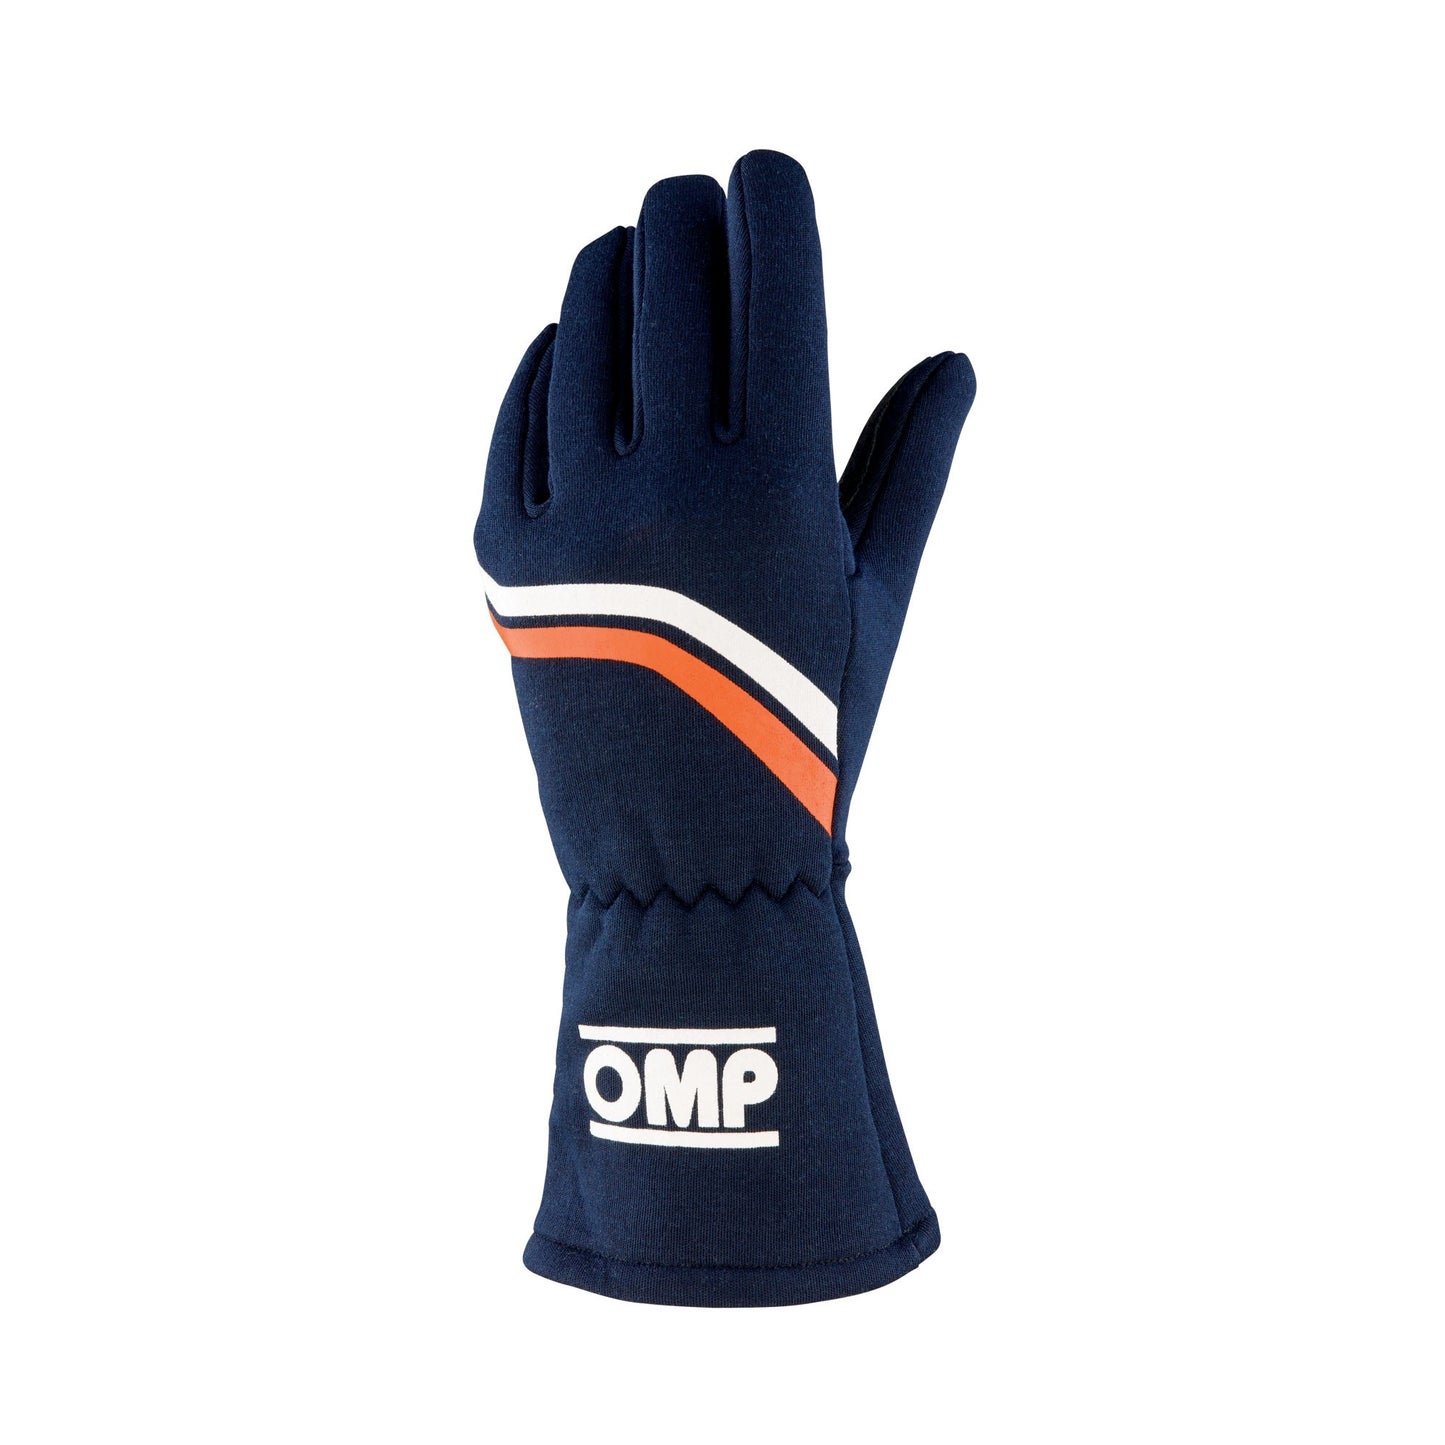 OMP New Rally Gloves - Ultimate Grip Race Gloves